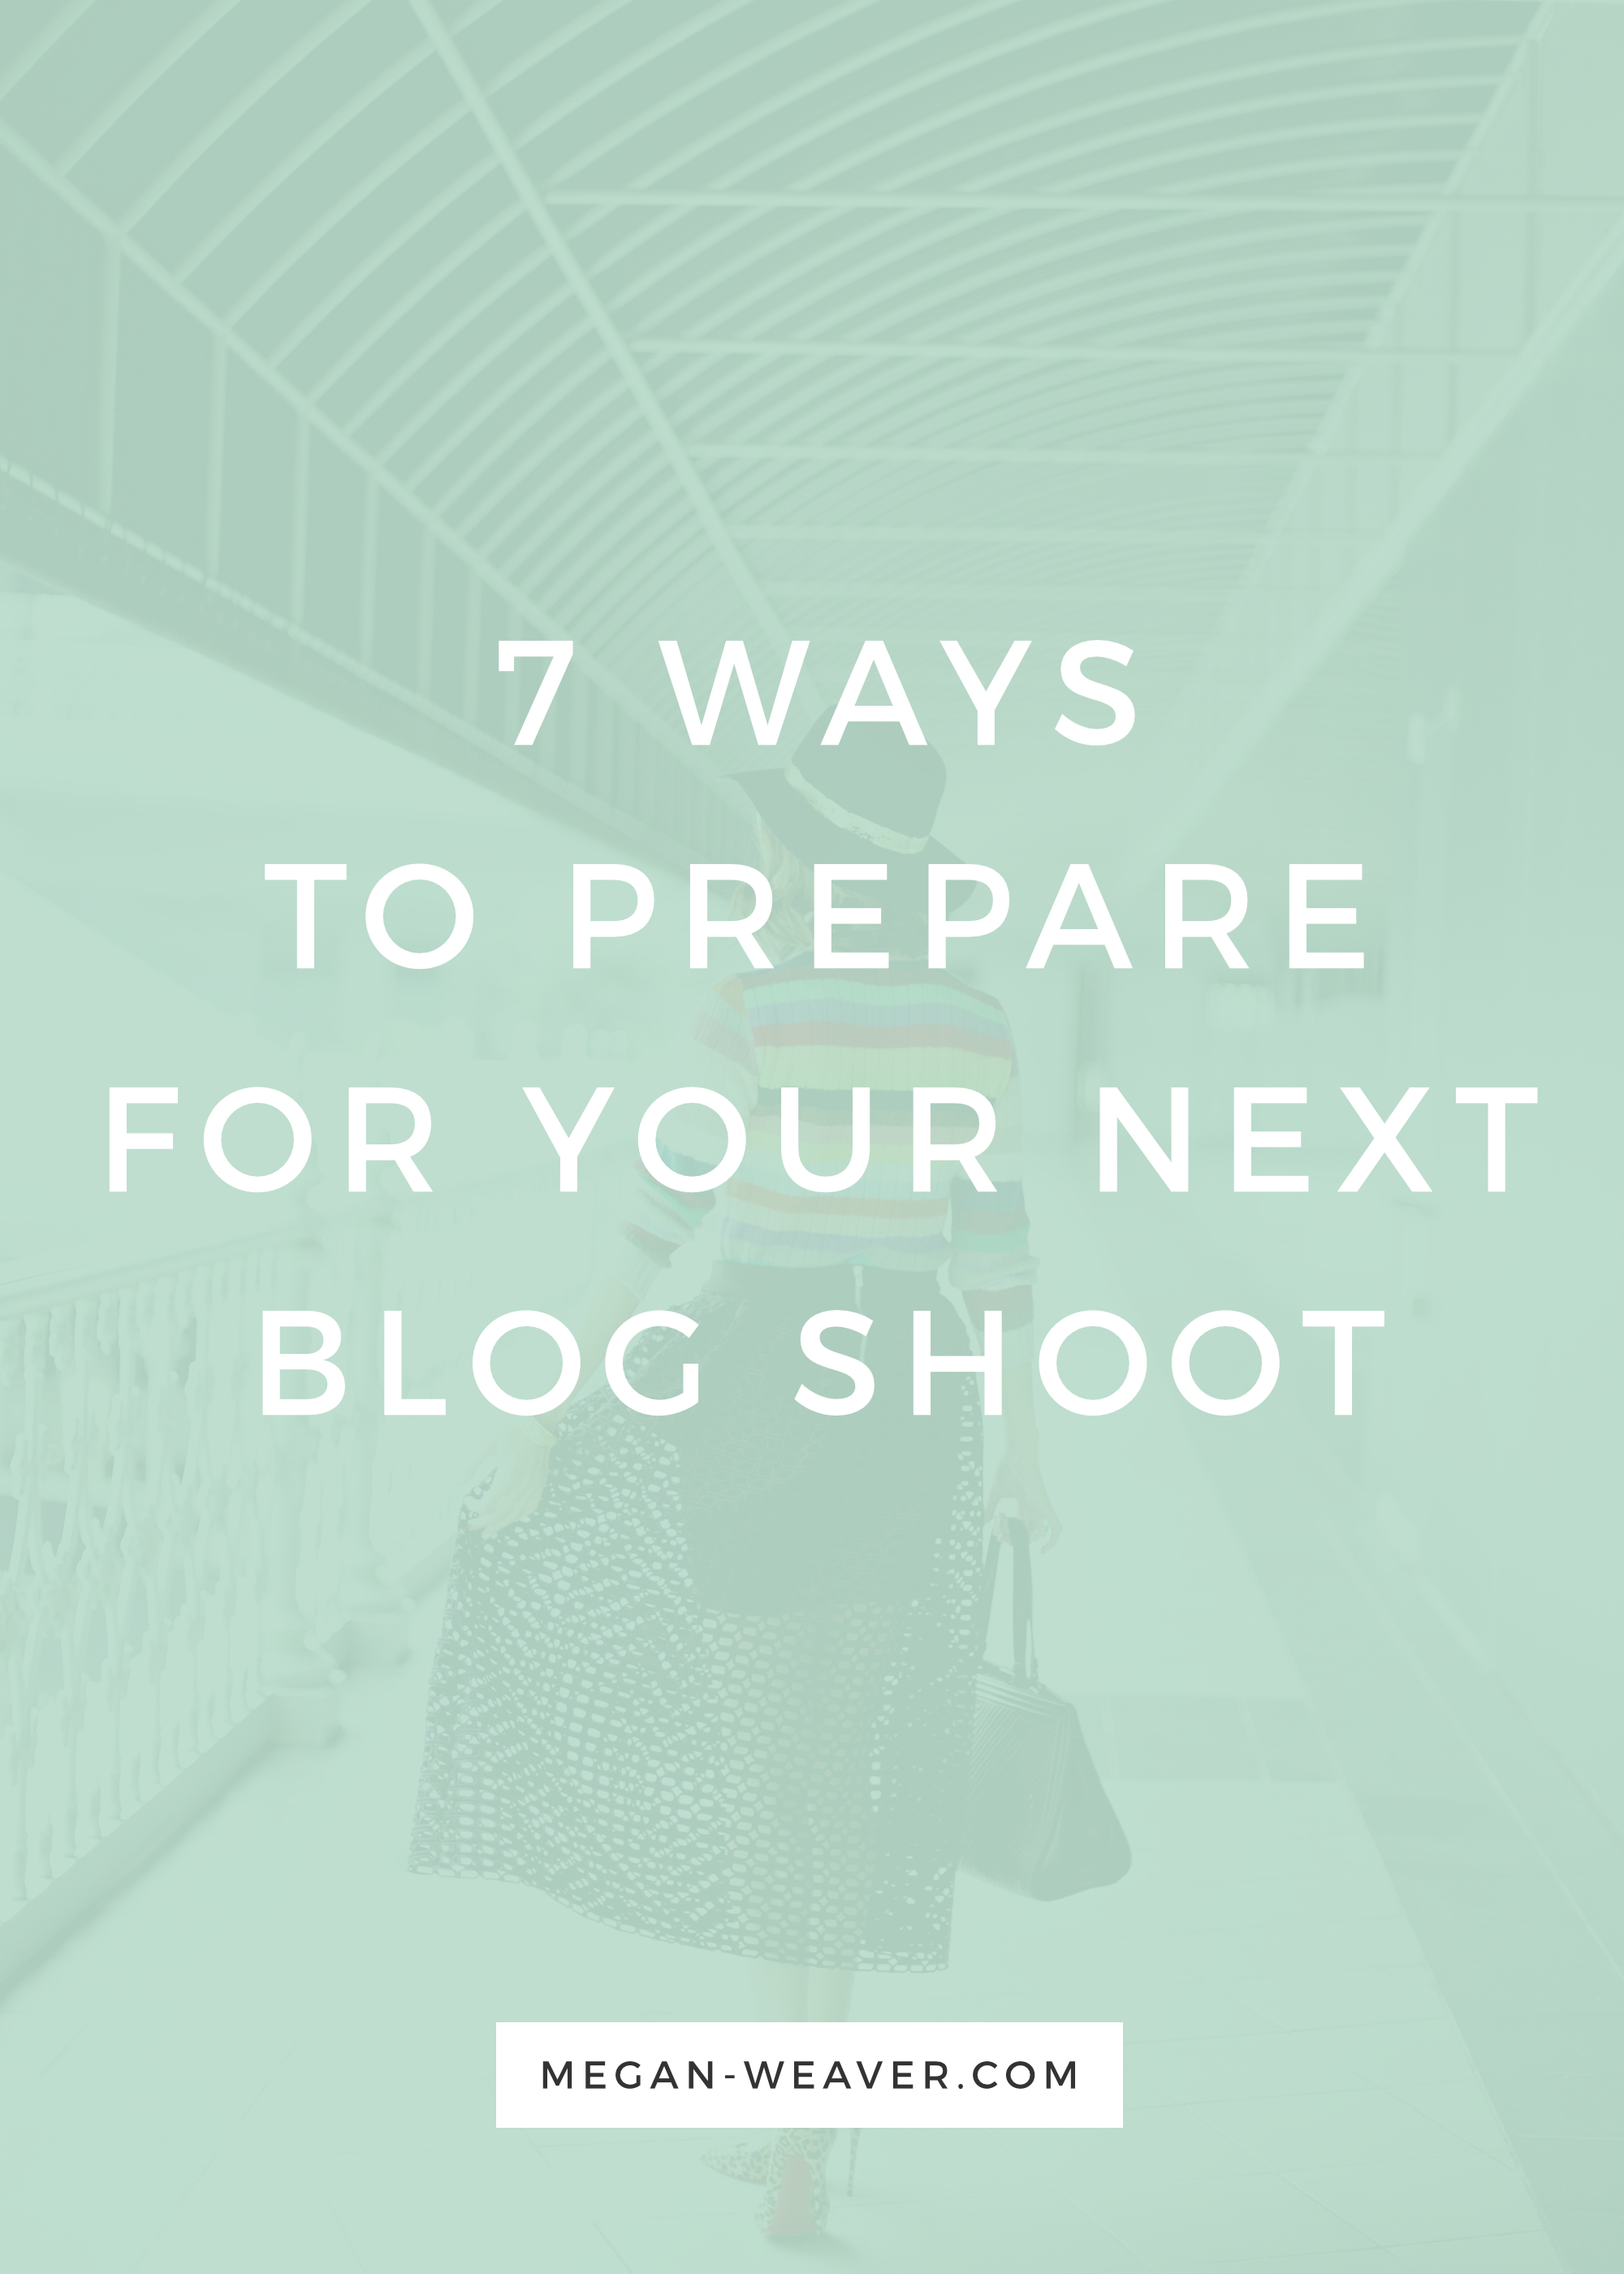 Prepare for your next big blog shoot with these 7 quick and easy tips!